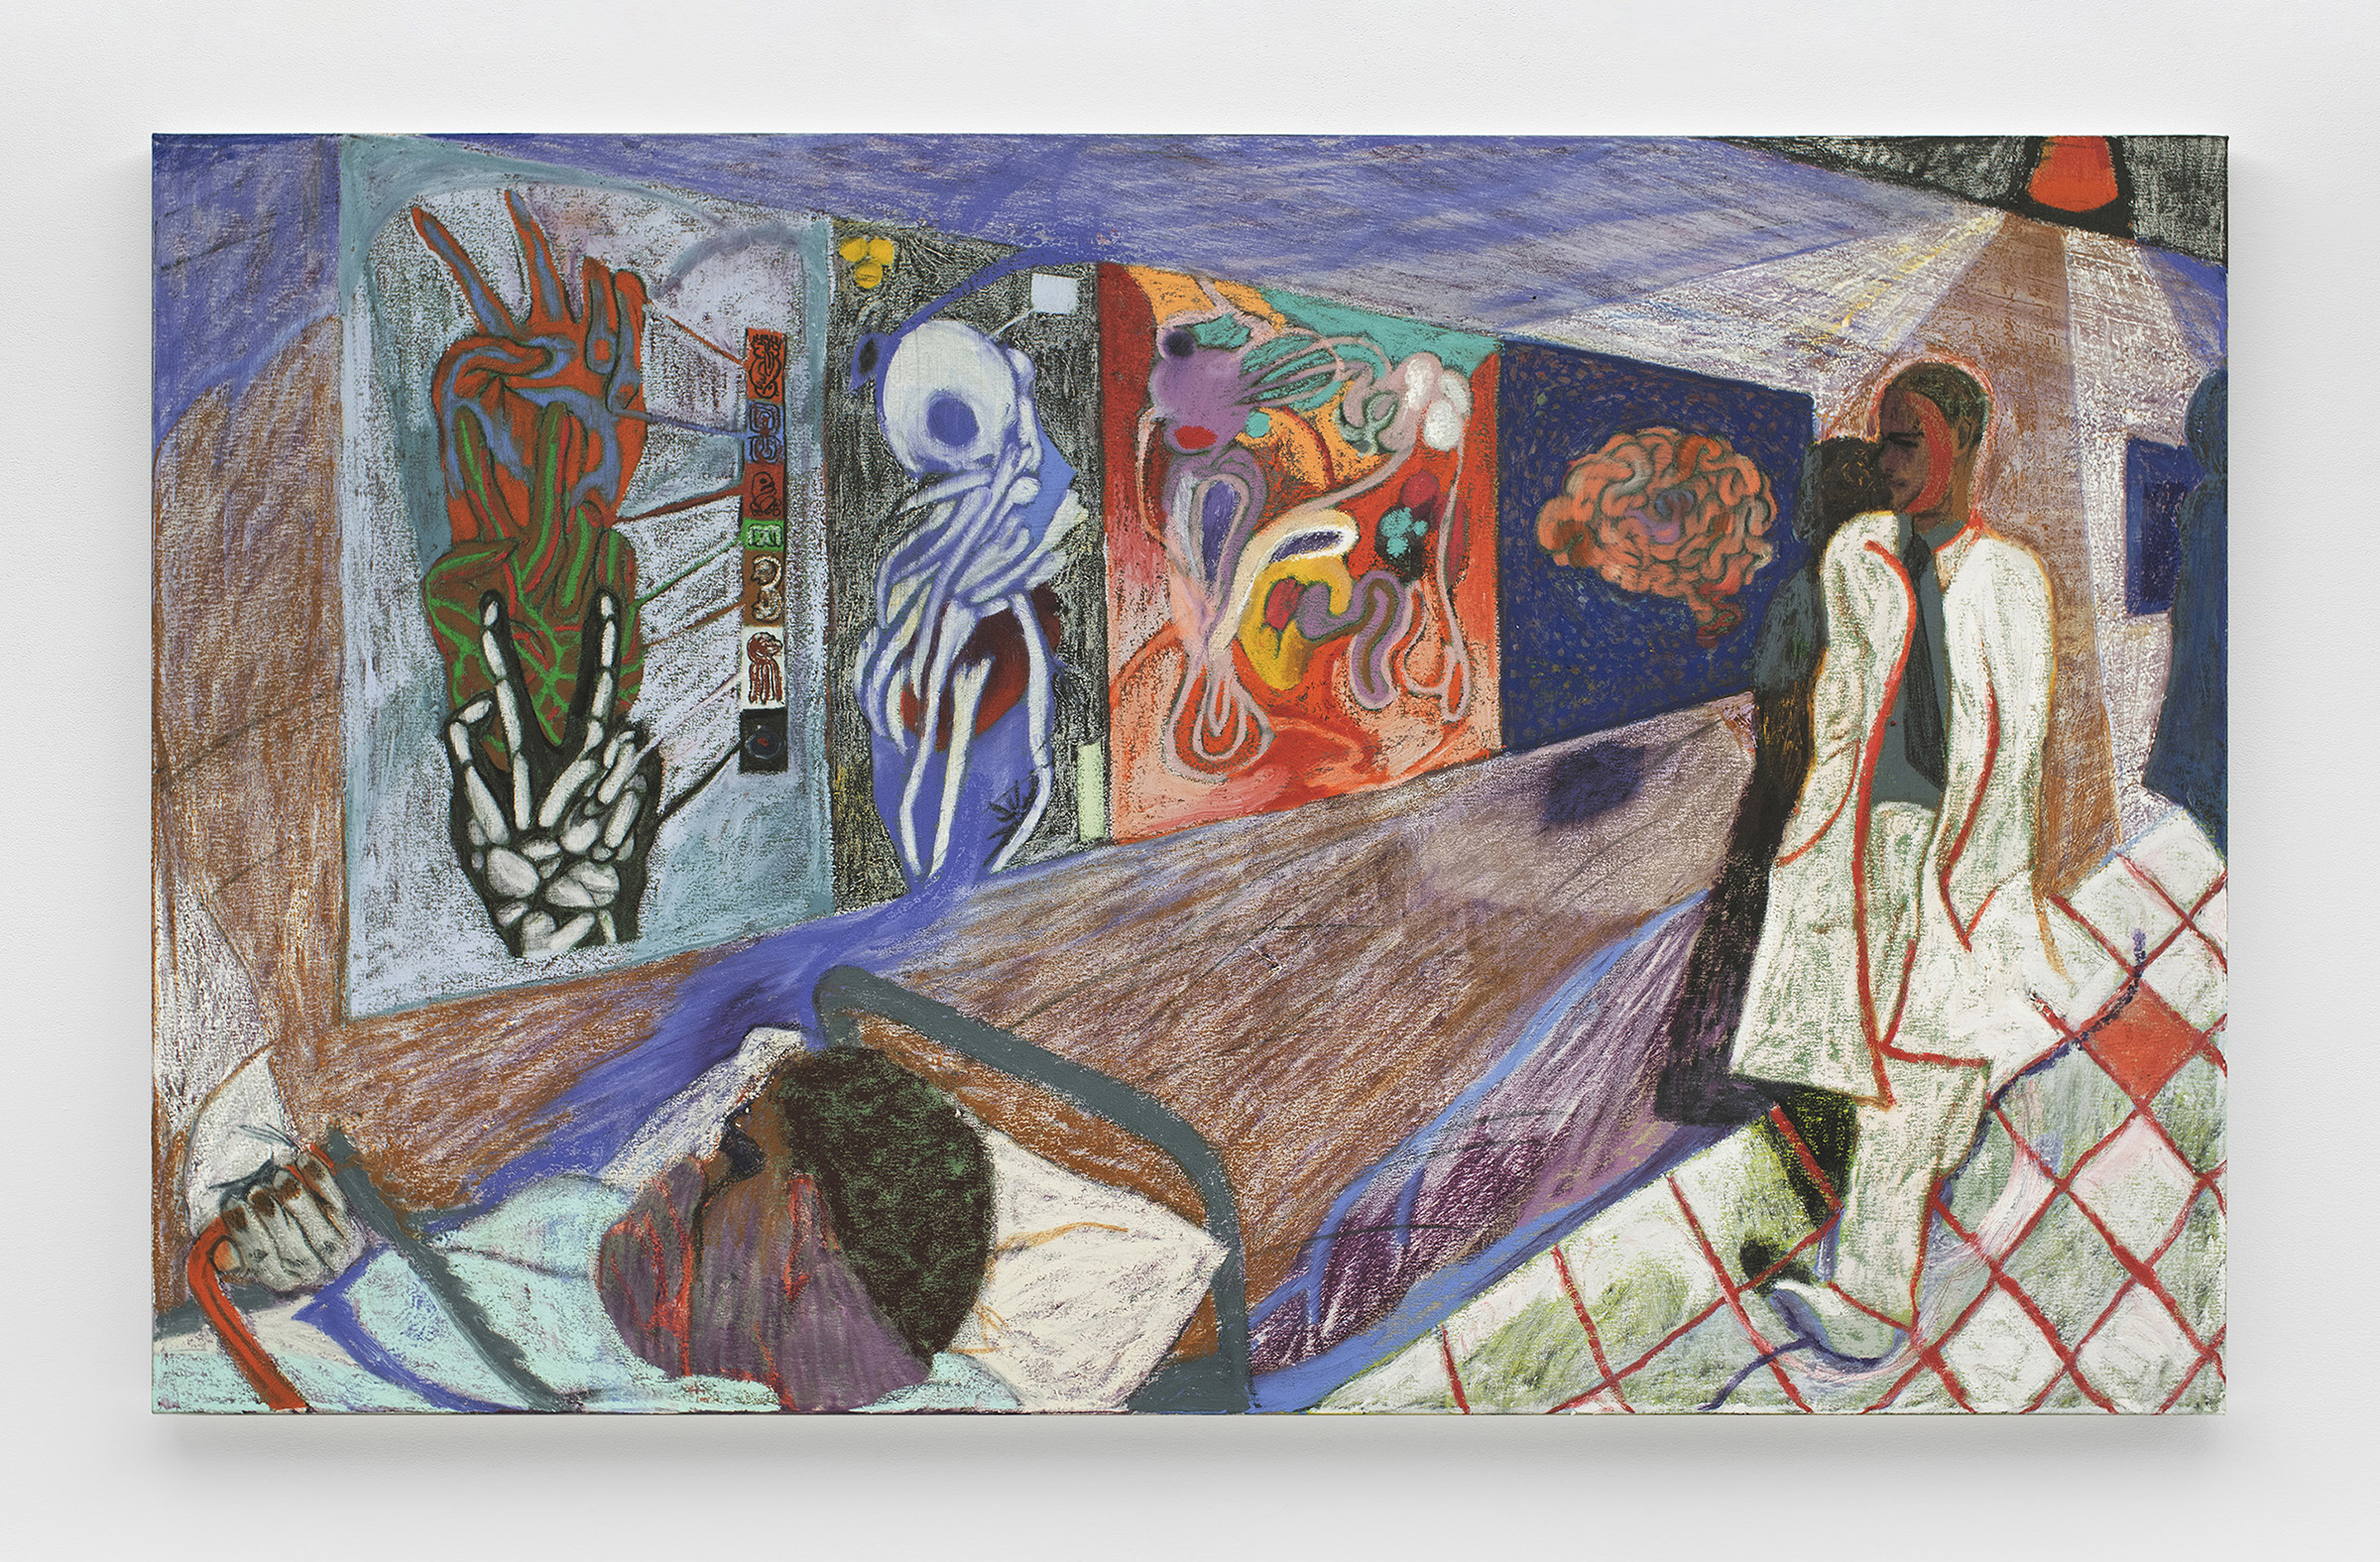 Henry Curchod, Doctor hard love, 2023, oil, acrylic and charcoal on linen, 91.4 x 147.3 cm, 36 x 58 in.